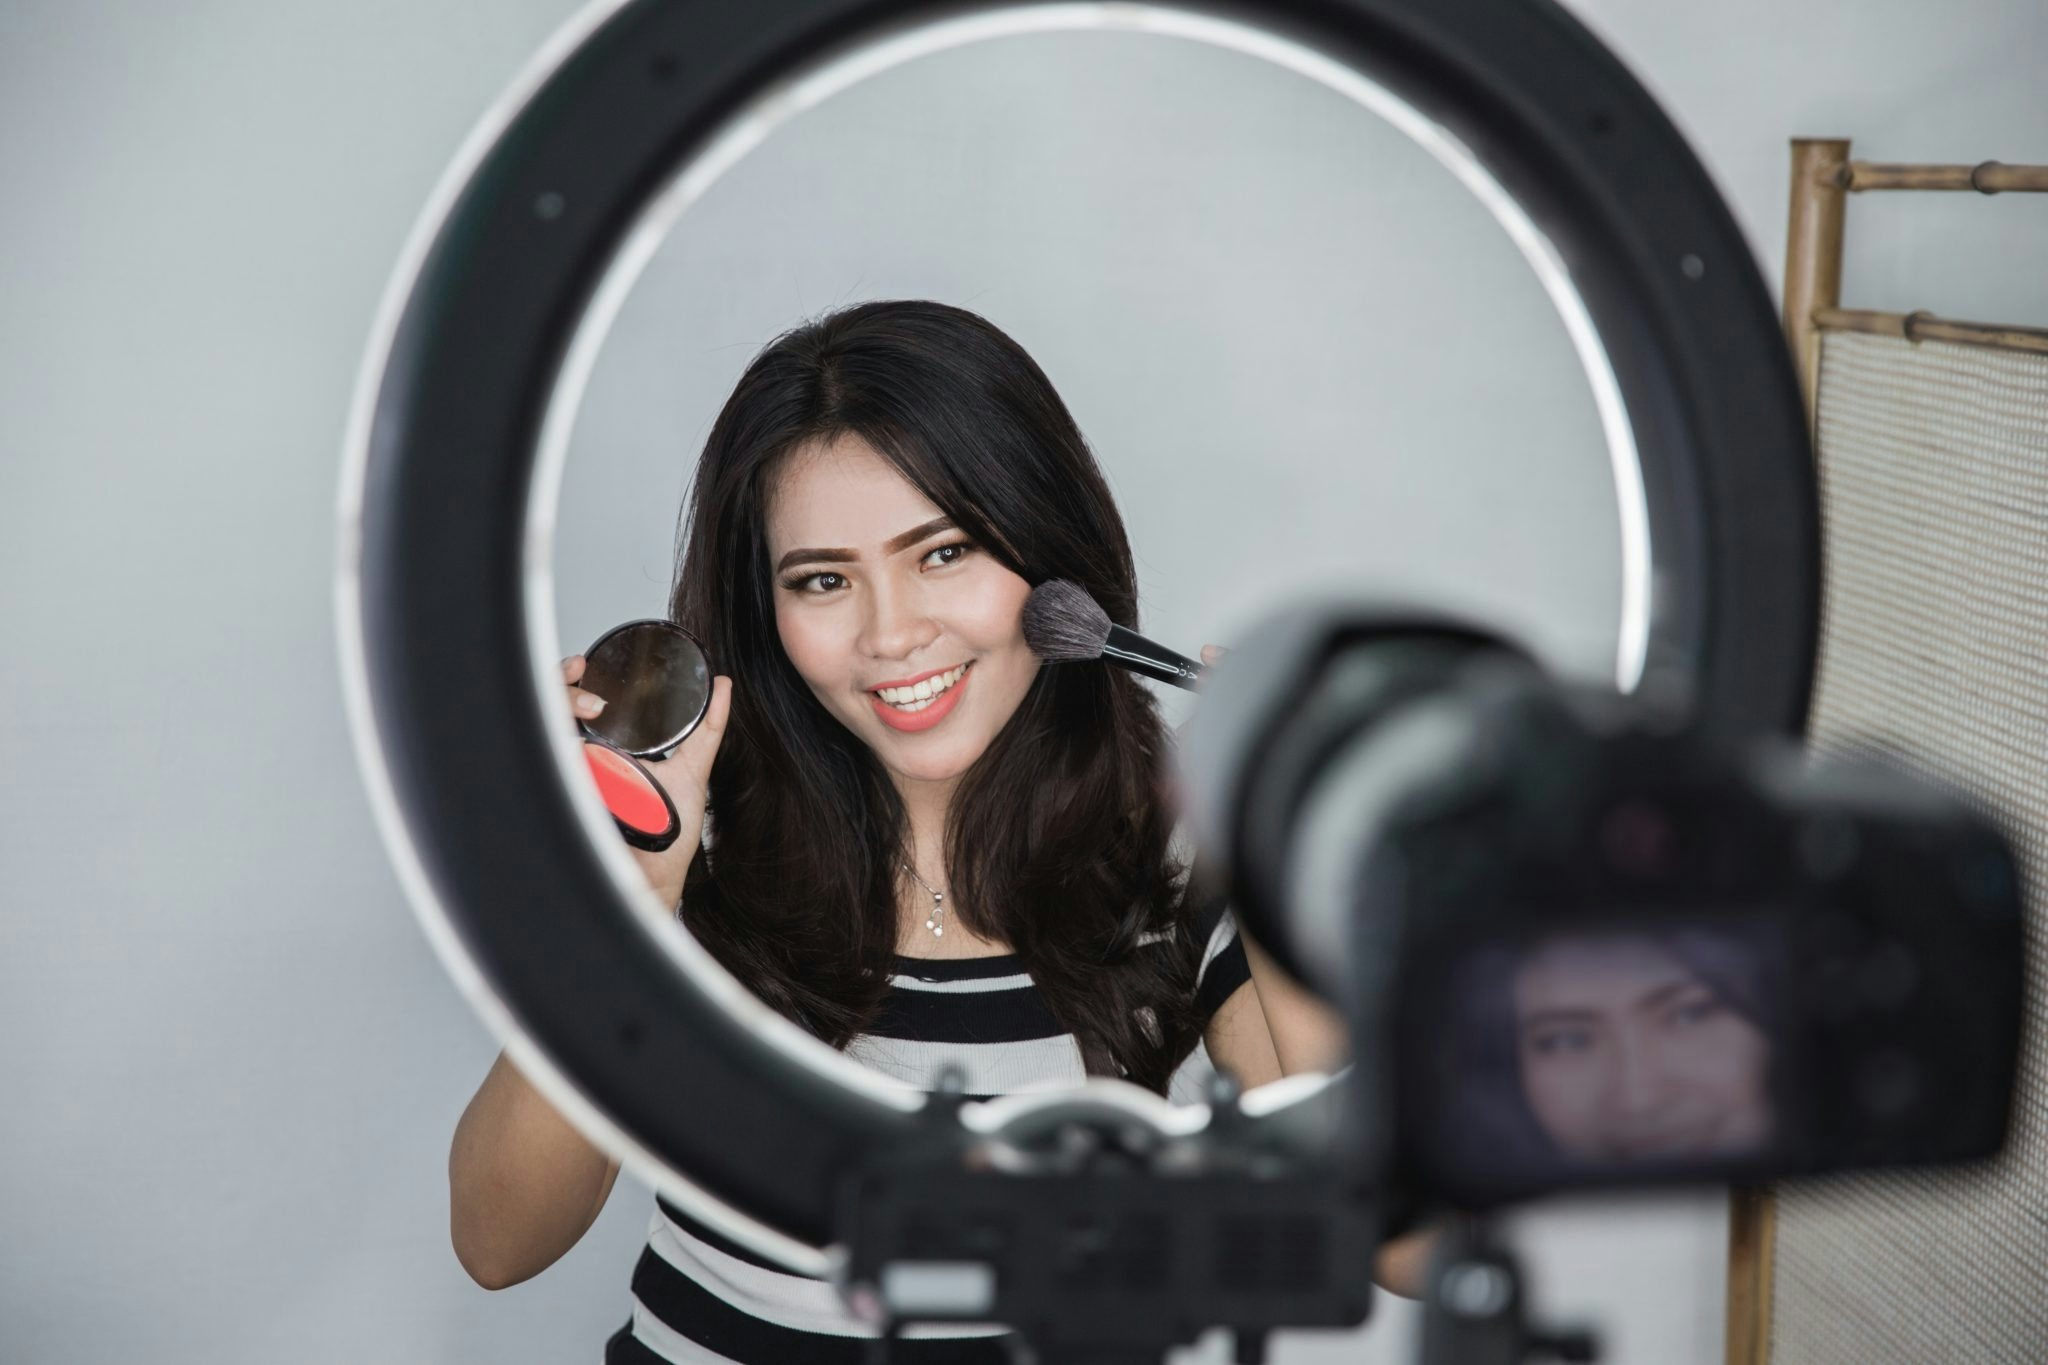 Almost half of young Chinese want to be influencers. With so many to choose from, brands can have an outsized influence by working with many of them, instead of one celebrity. Photo: Shutterstock